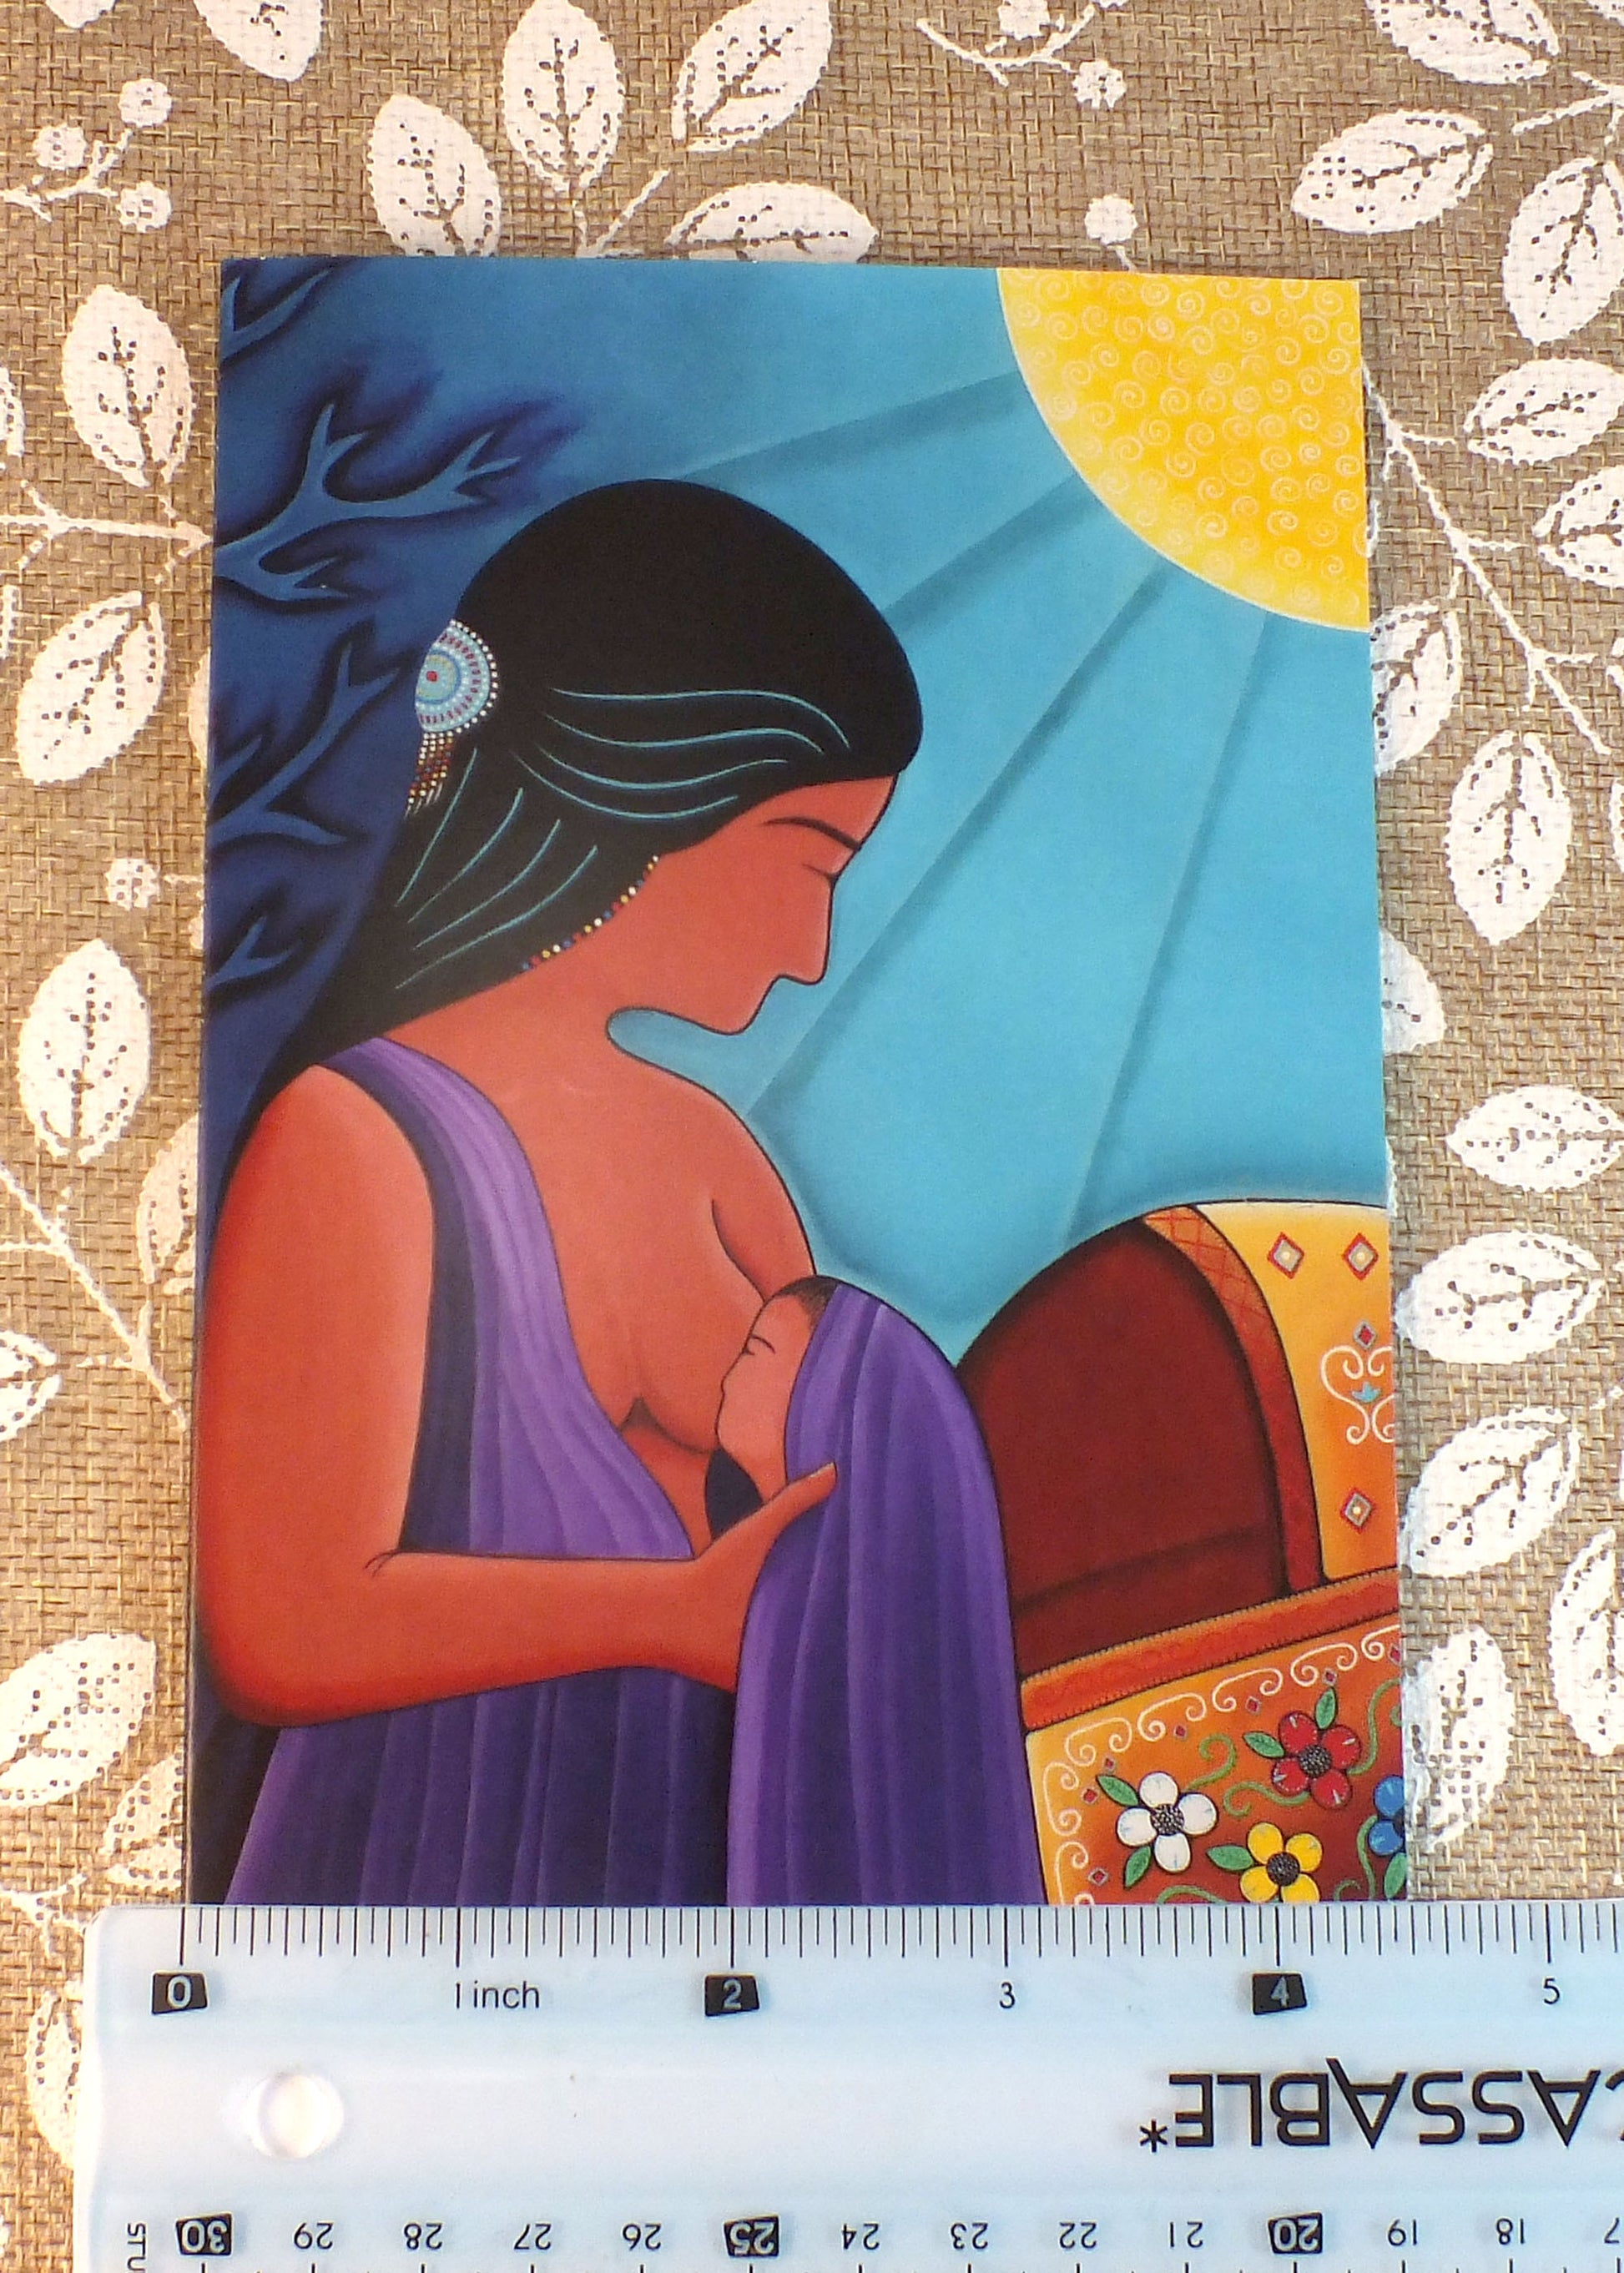 Blank Folding Greeting Cards & Envelopes Materials: standard card stock, print of original paintings All occasion gorgeous blank cards and envelopes Artwork done by Loretta Gould  Mi'kmaq Artist from Nova Scotia (Waycobah First Nation)